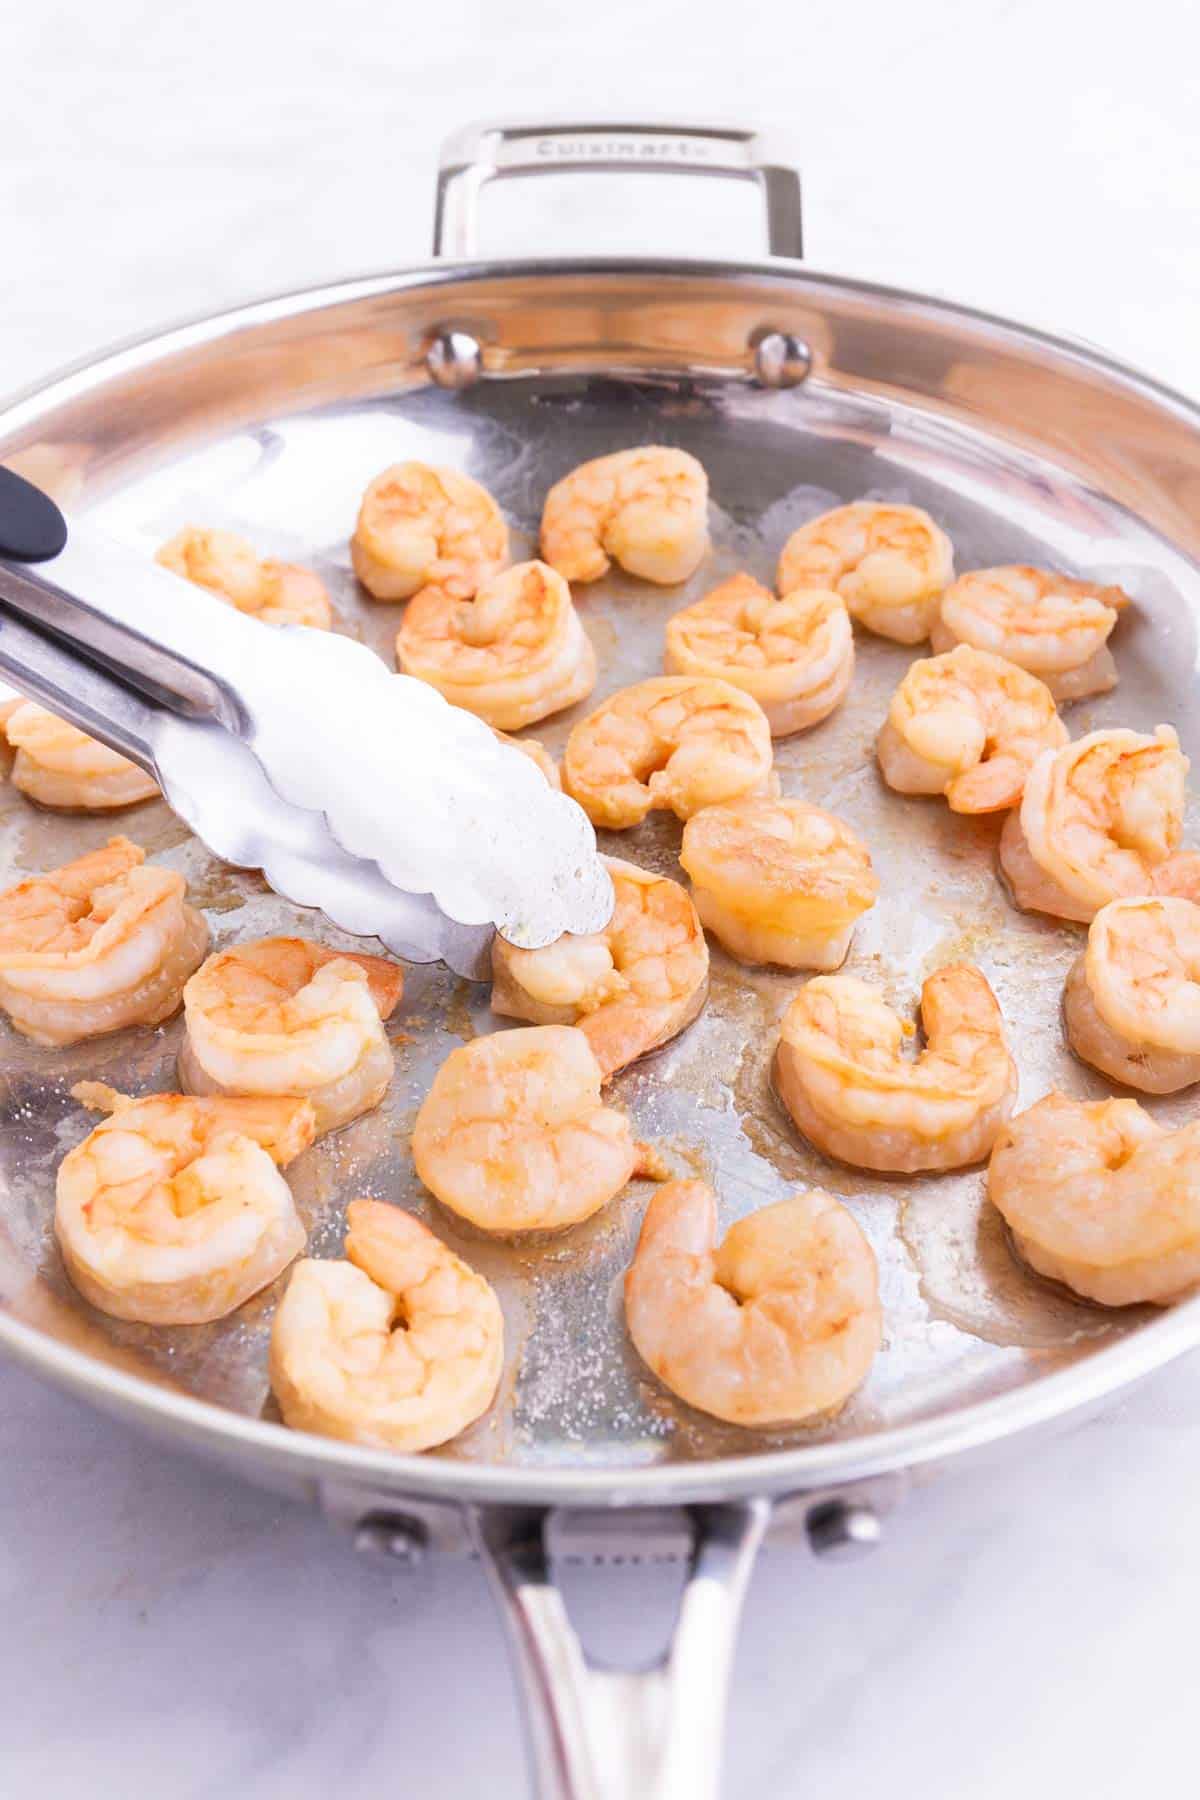 Shrimp is cooked in a skillet.